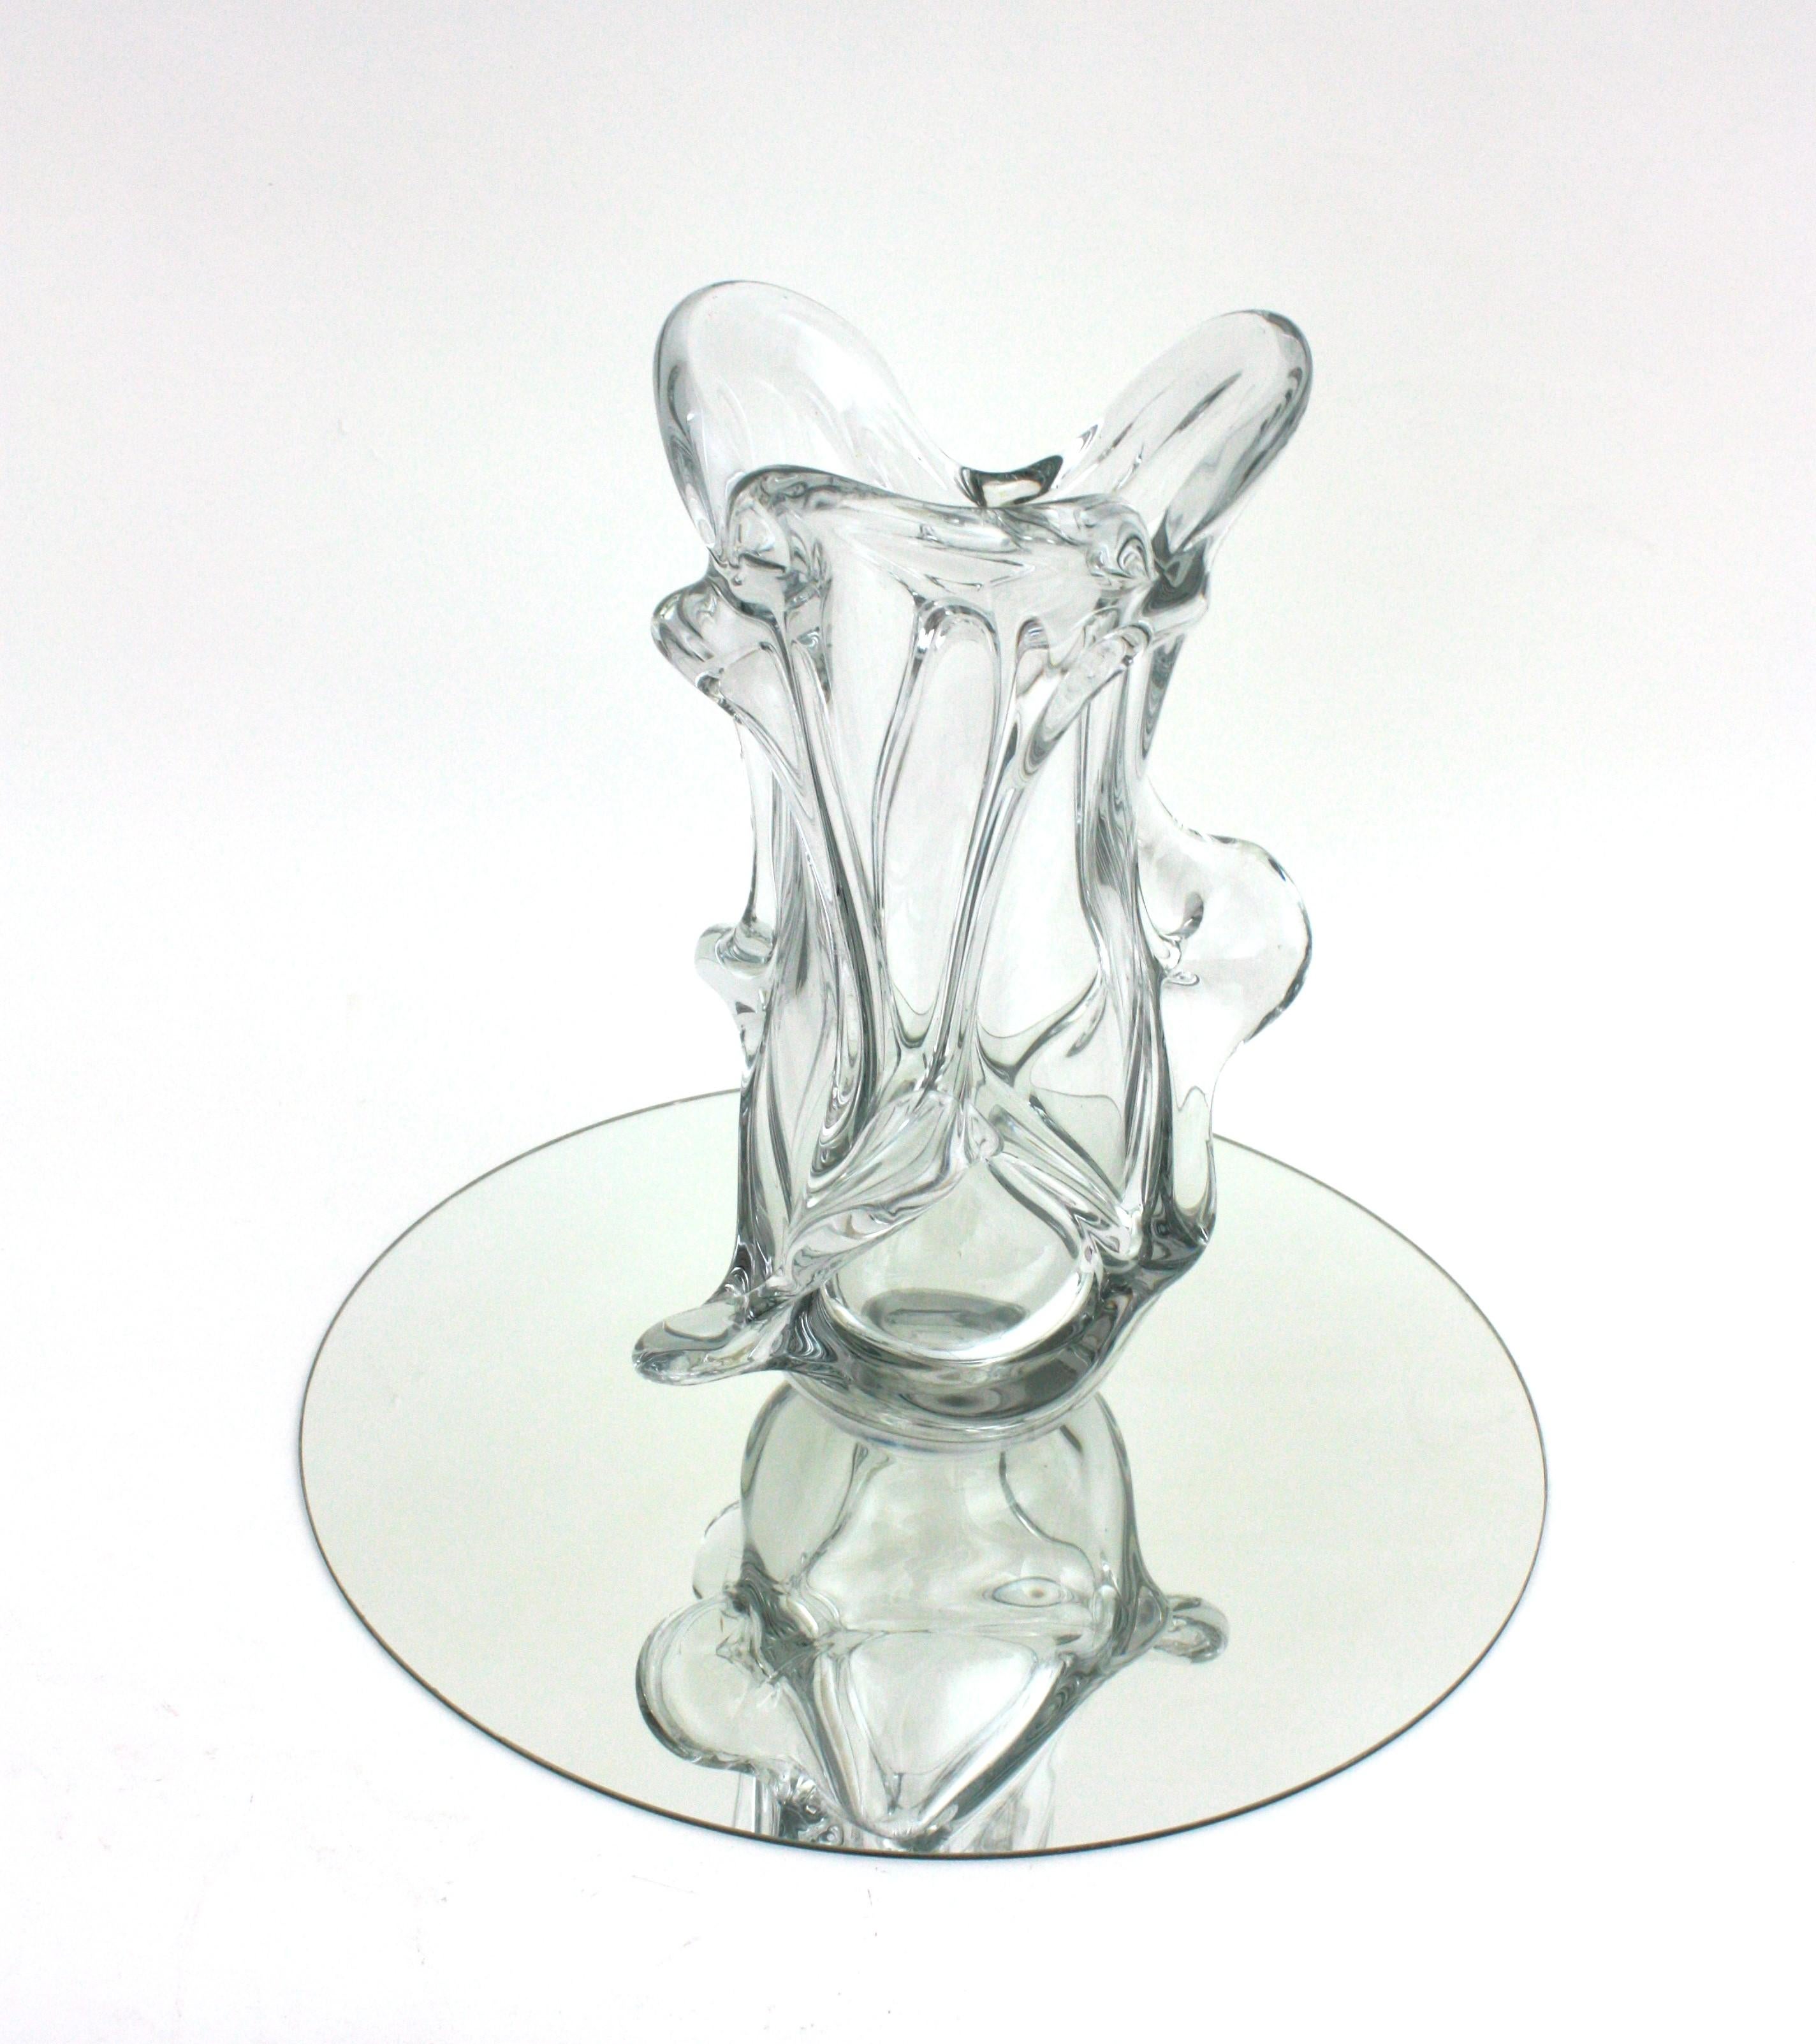 Large Murano Organic Shaped Vase in Clear Glass, 1950s For Sale 1